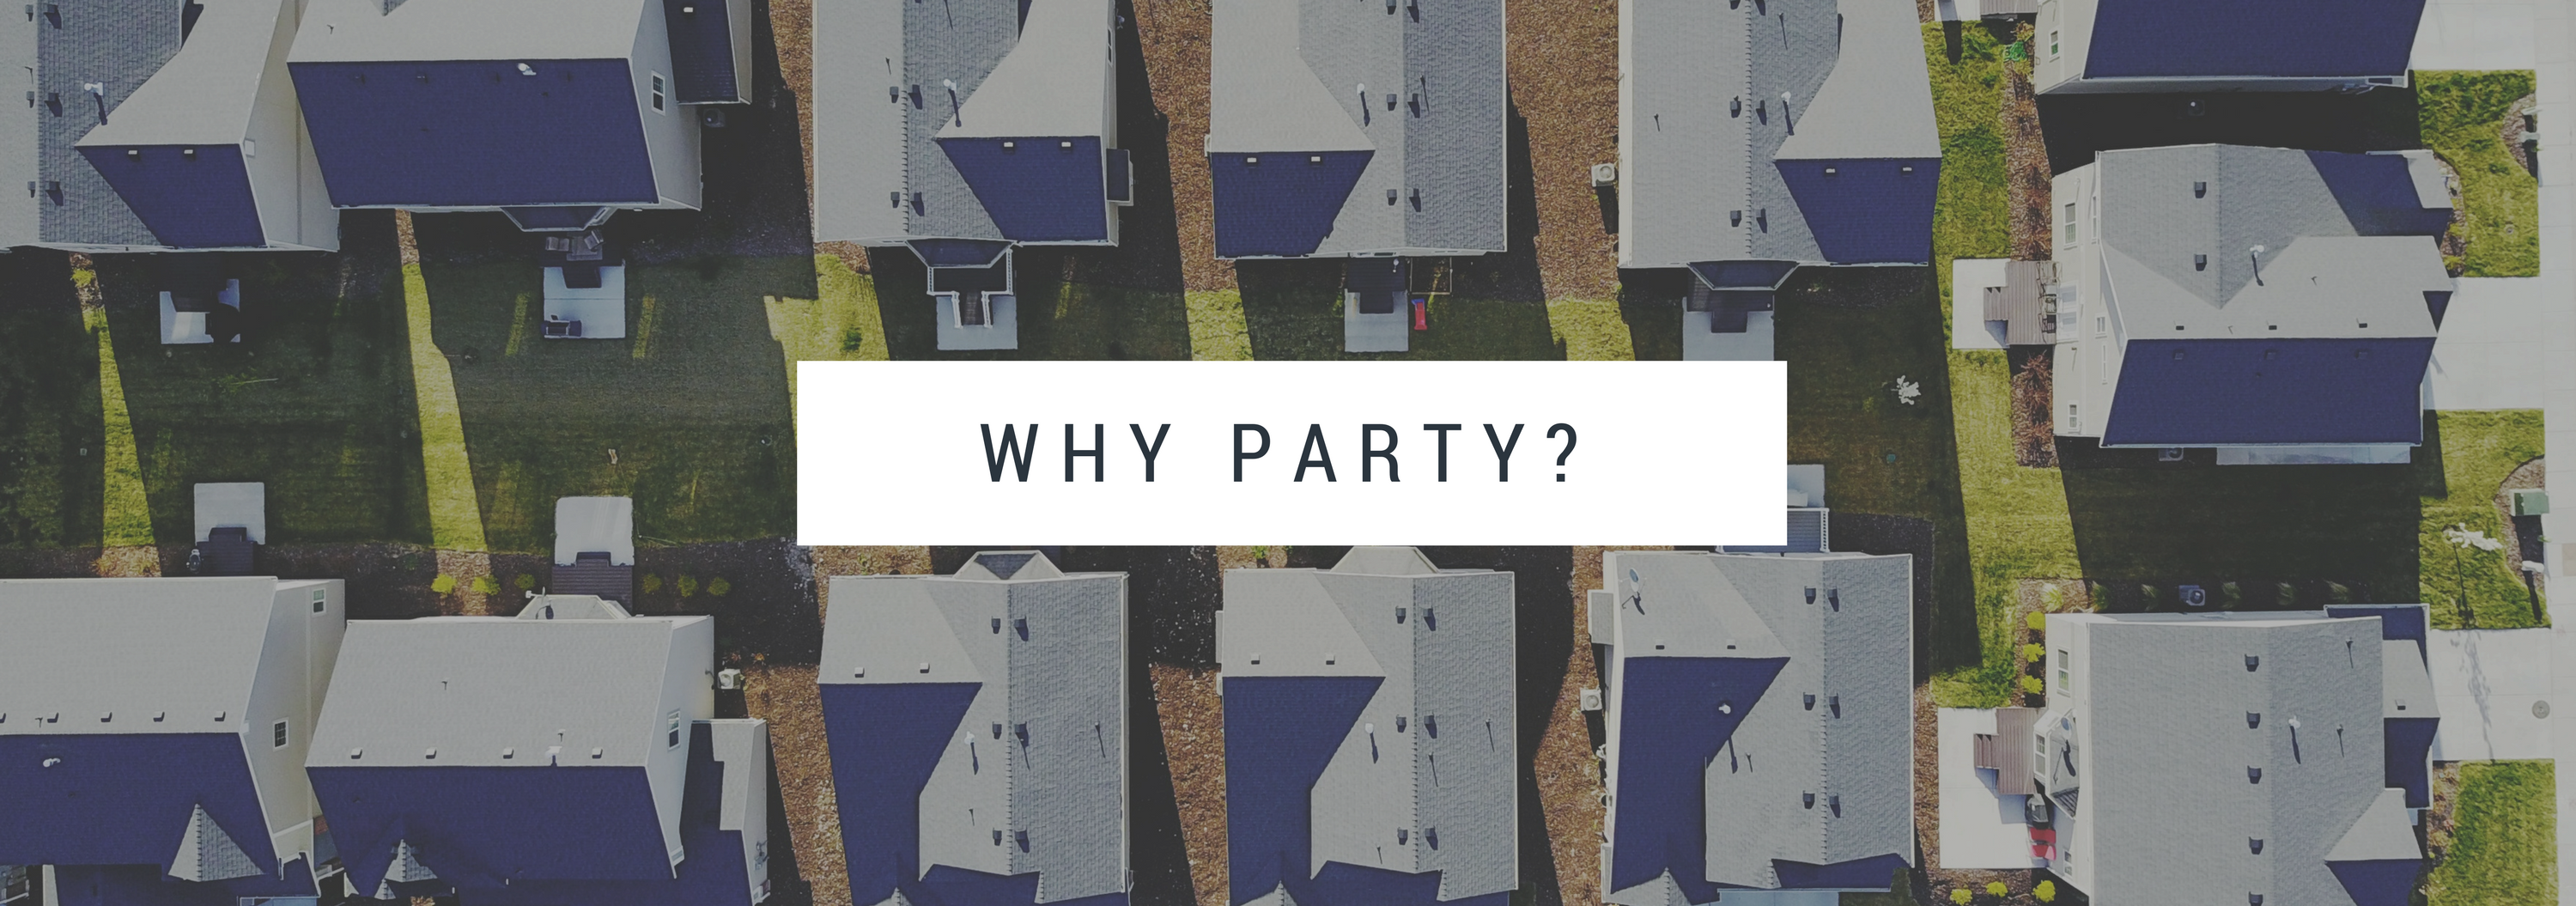 Neighborhood houses overhead church ministry idea Party Header Why Party.png